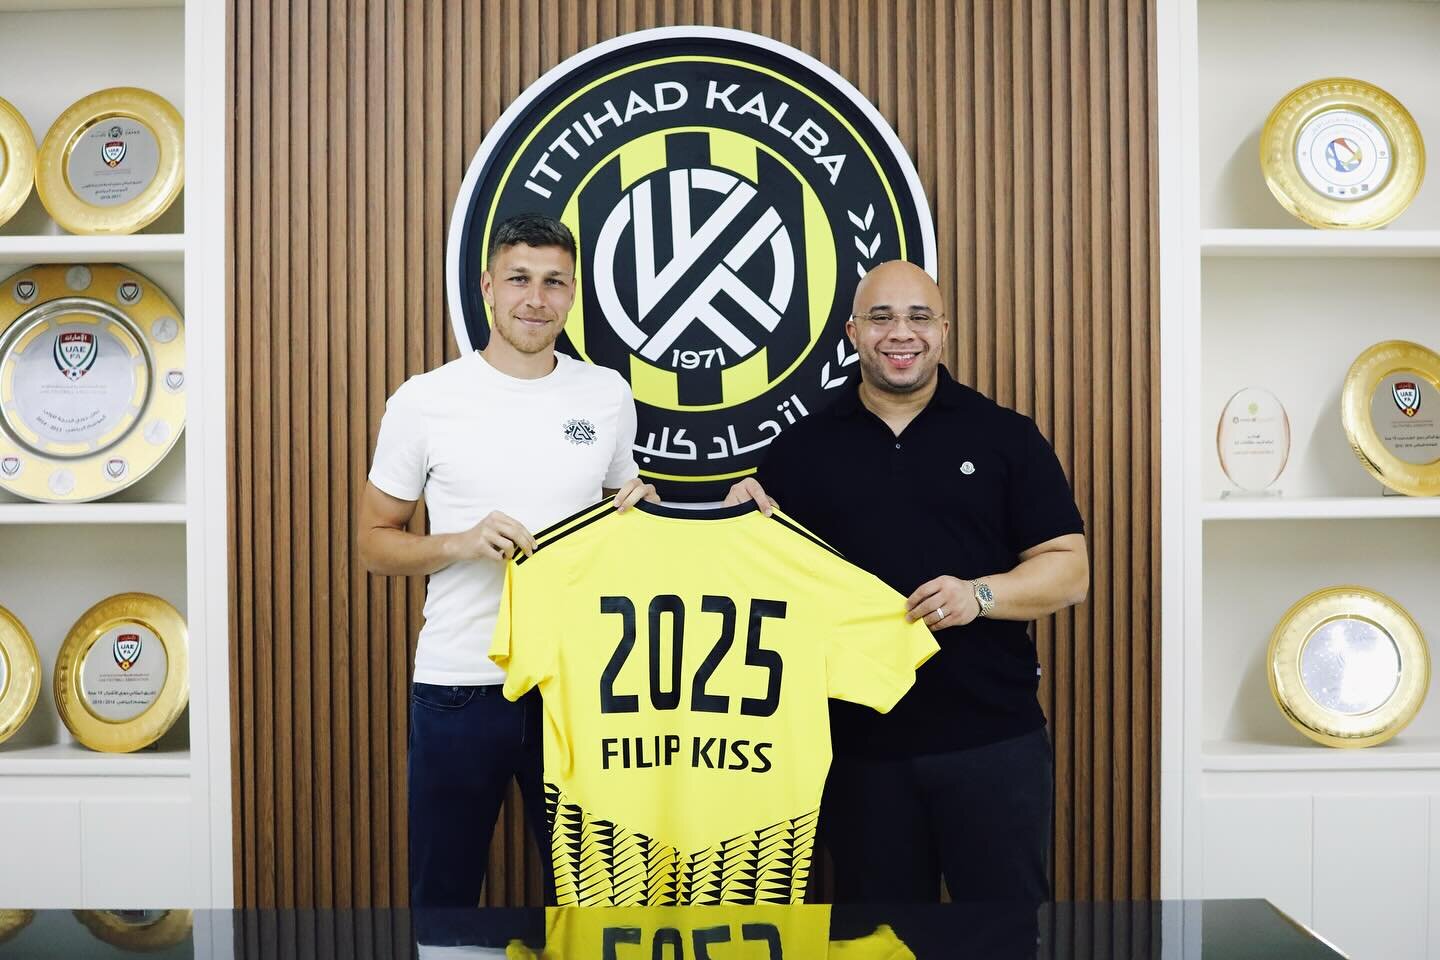 Another 👆🏽 | We just extended our Defensive Midfielder / Central Defender - Filip Kiss of Ittihad Kalba 🇦🇪 until 2025 ✍🏽🙏🏽 #loyalty #proud #godisgreat #thankful